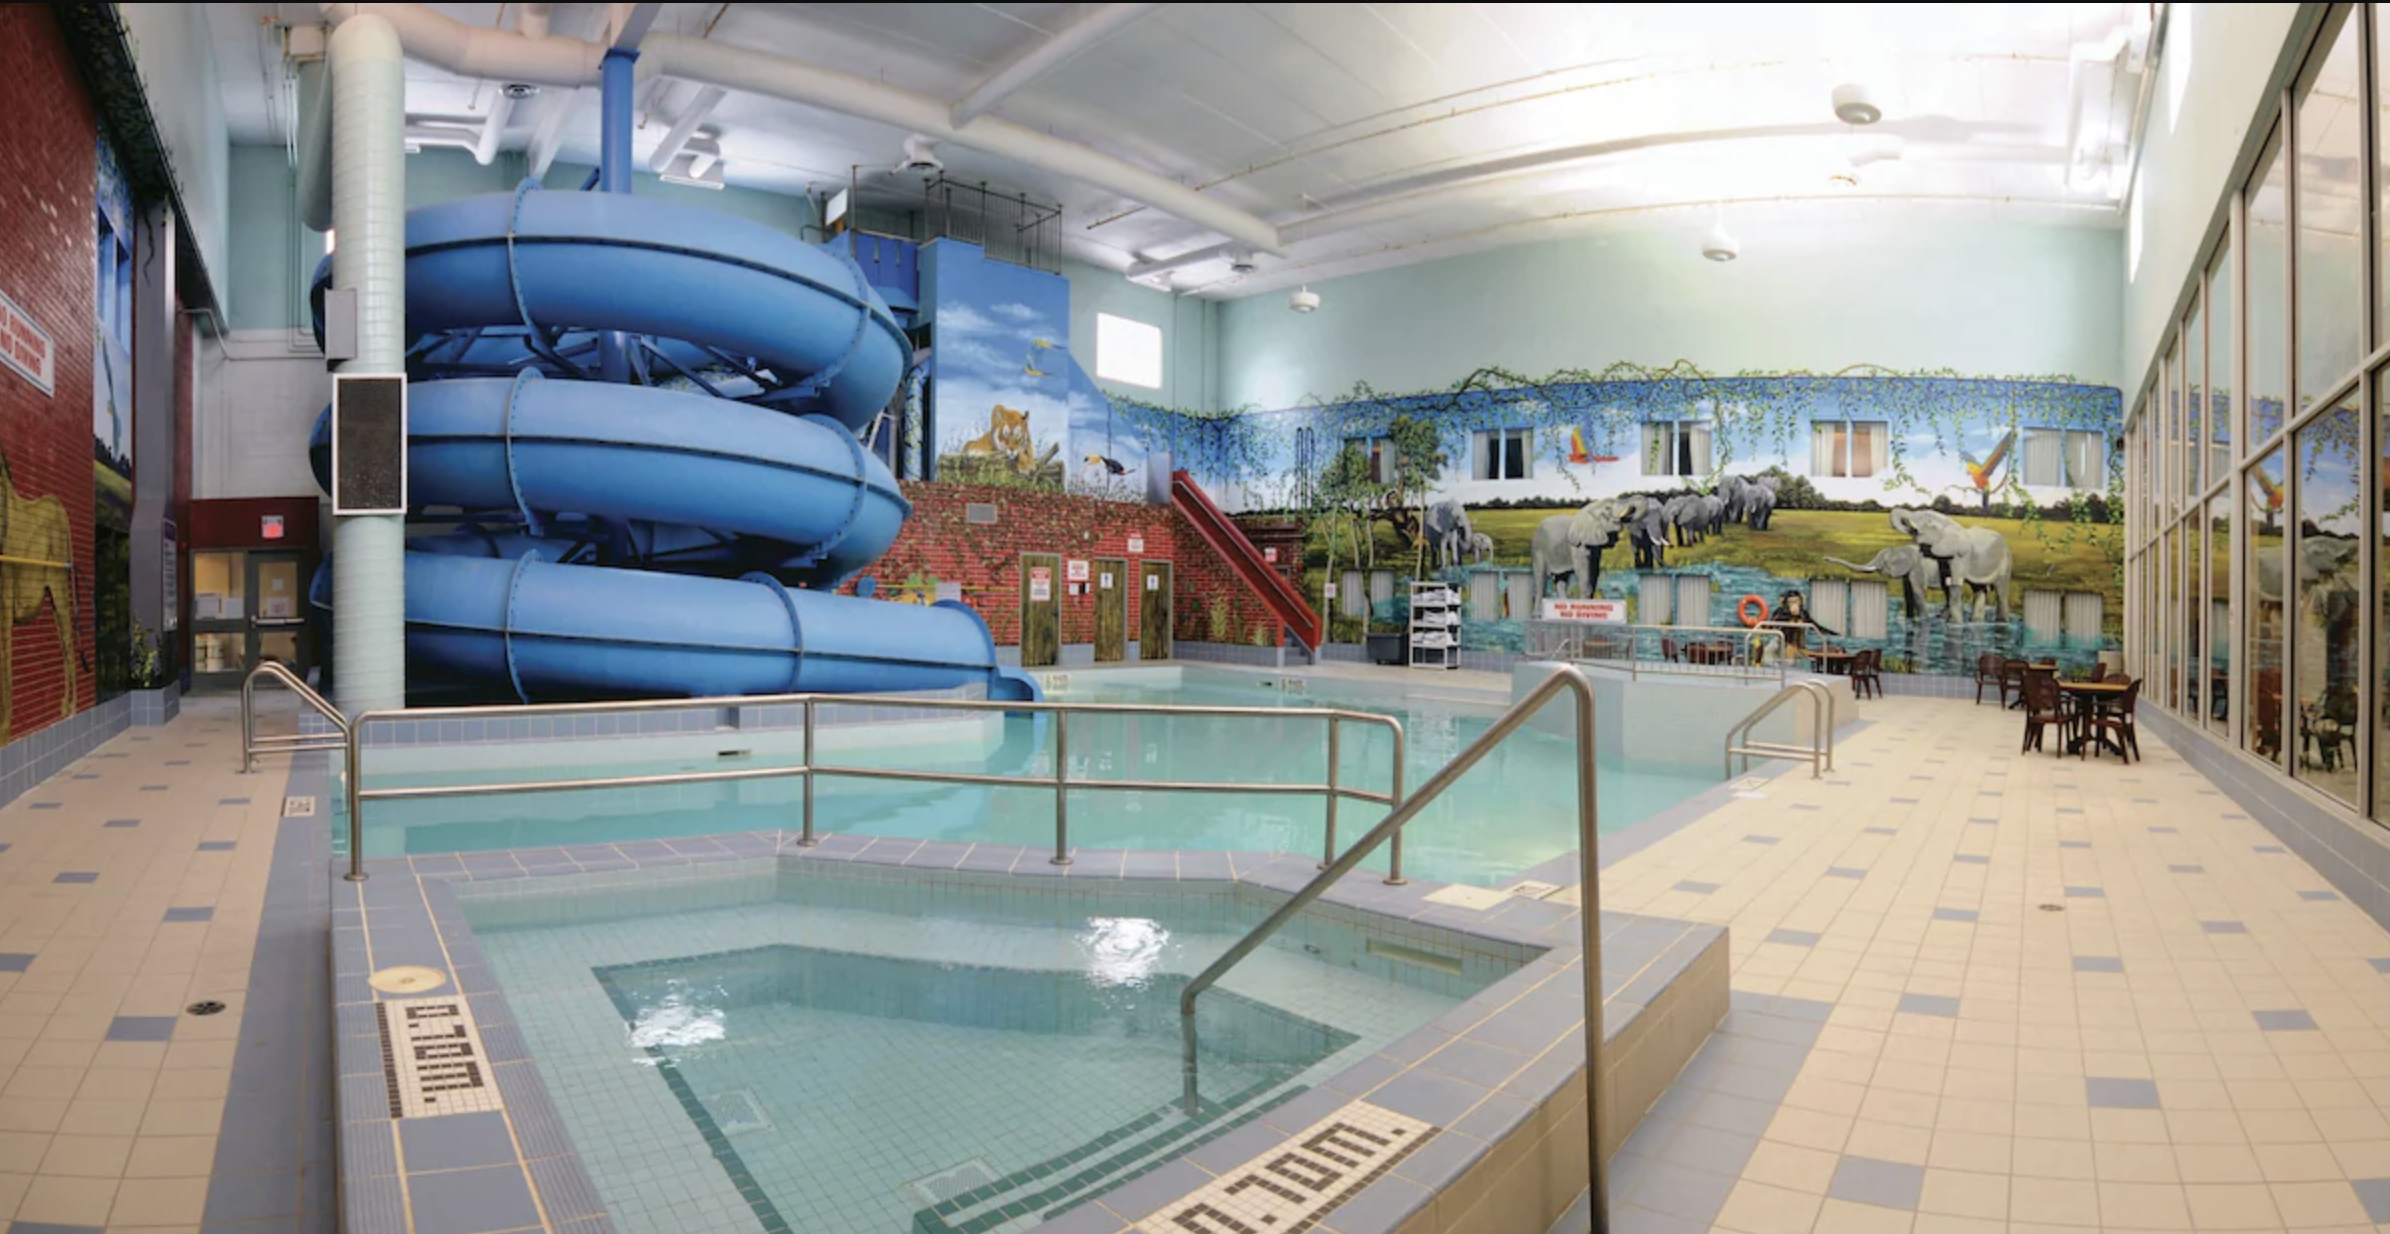 Canad Inns Destination Centre Fort Garry Pool with Waterslide